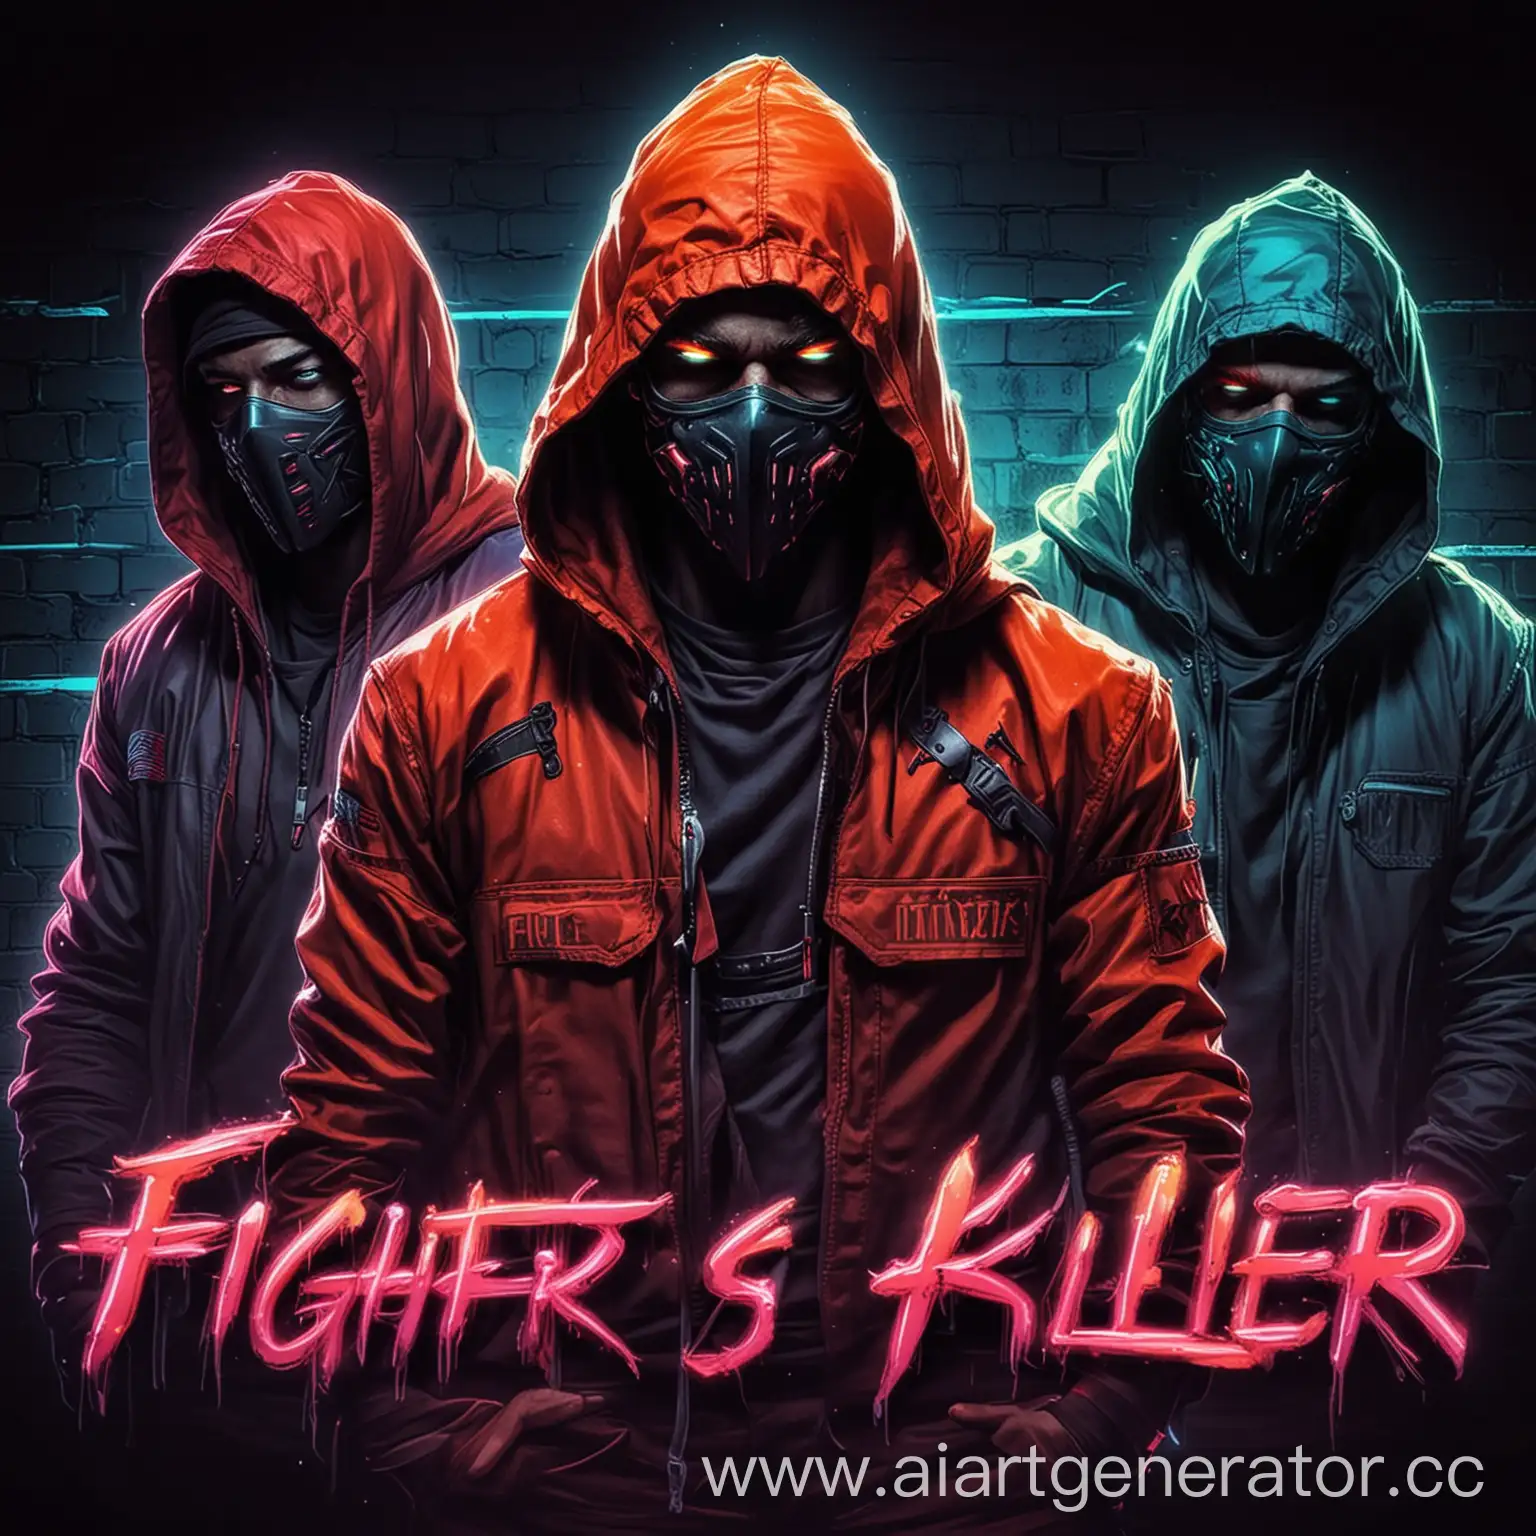 Neon-Hooded-Fighter-and-Friends-Engage-in-Intense-Combat